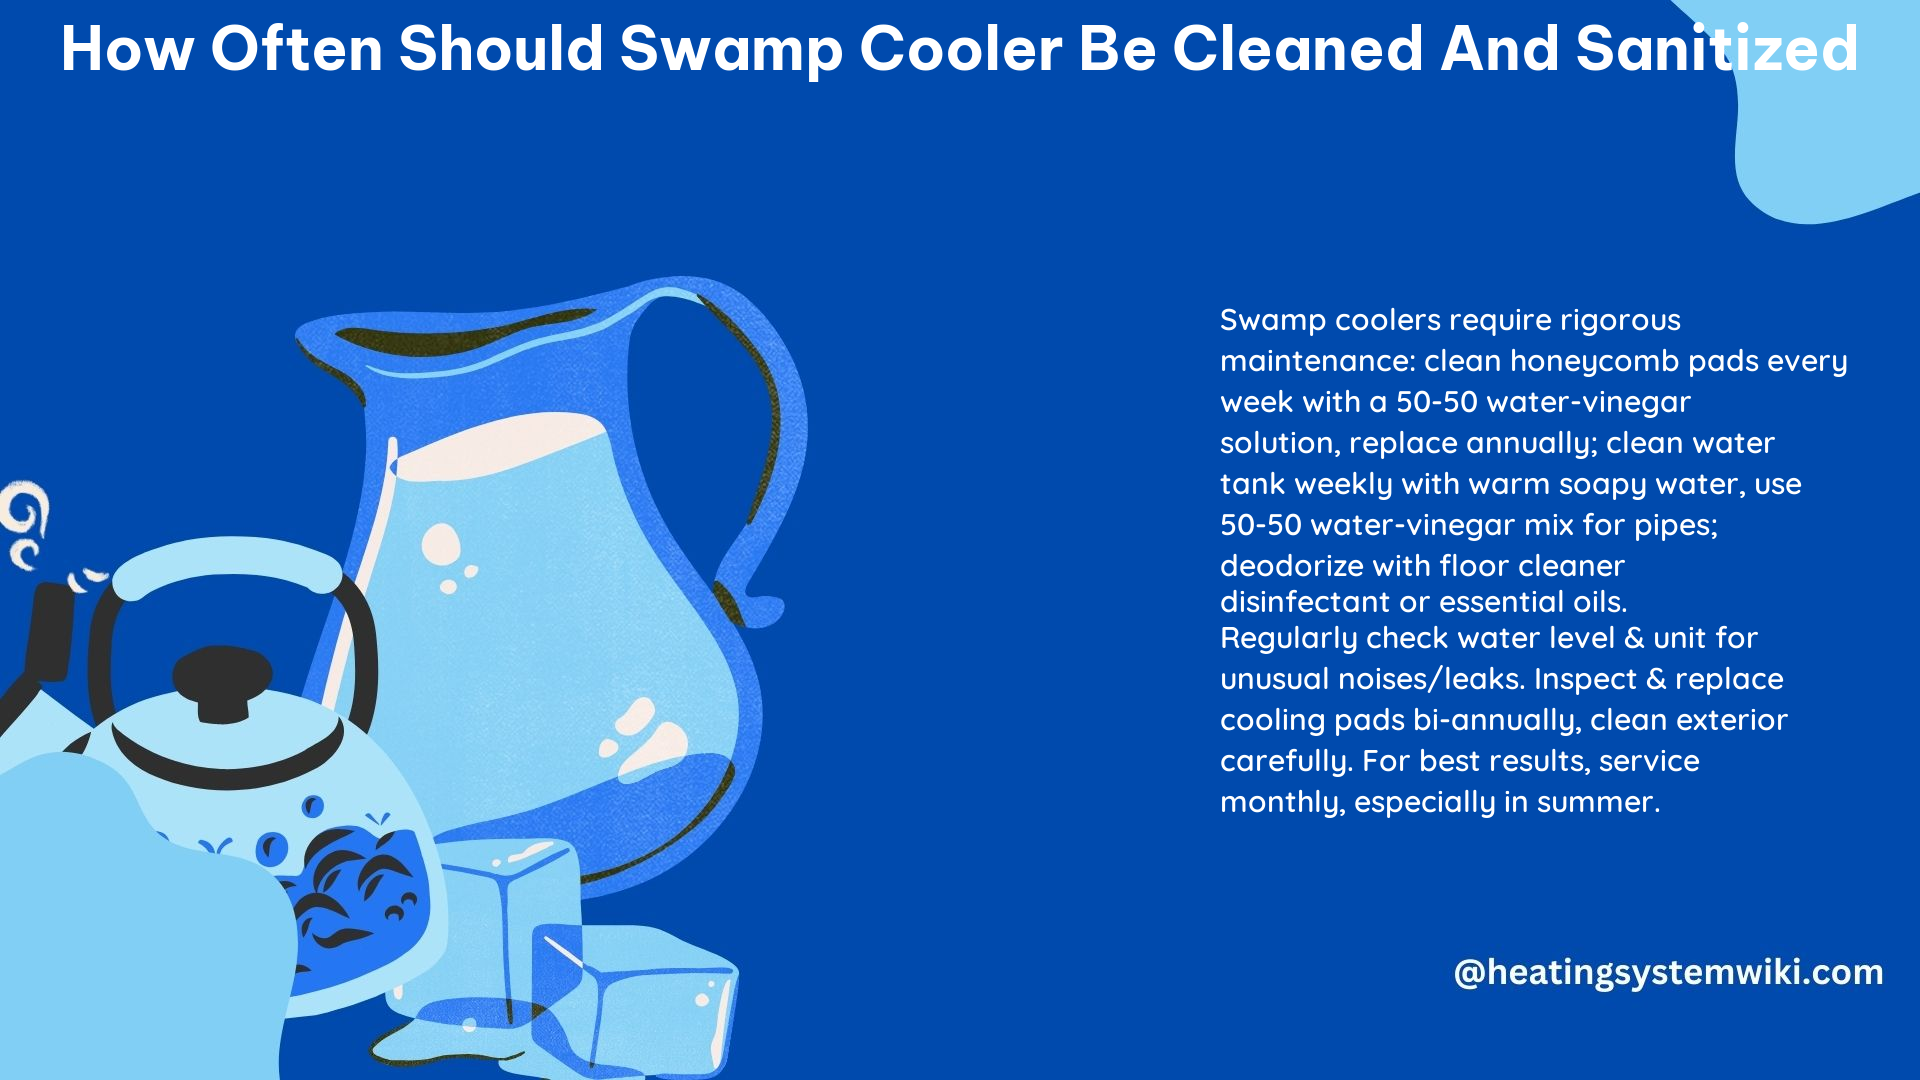 How Often Should Swamp Cooler Be Cleaned and Sanitized